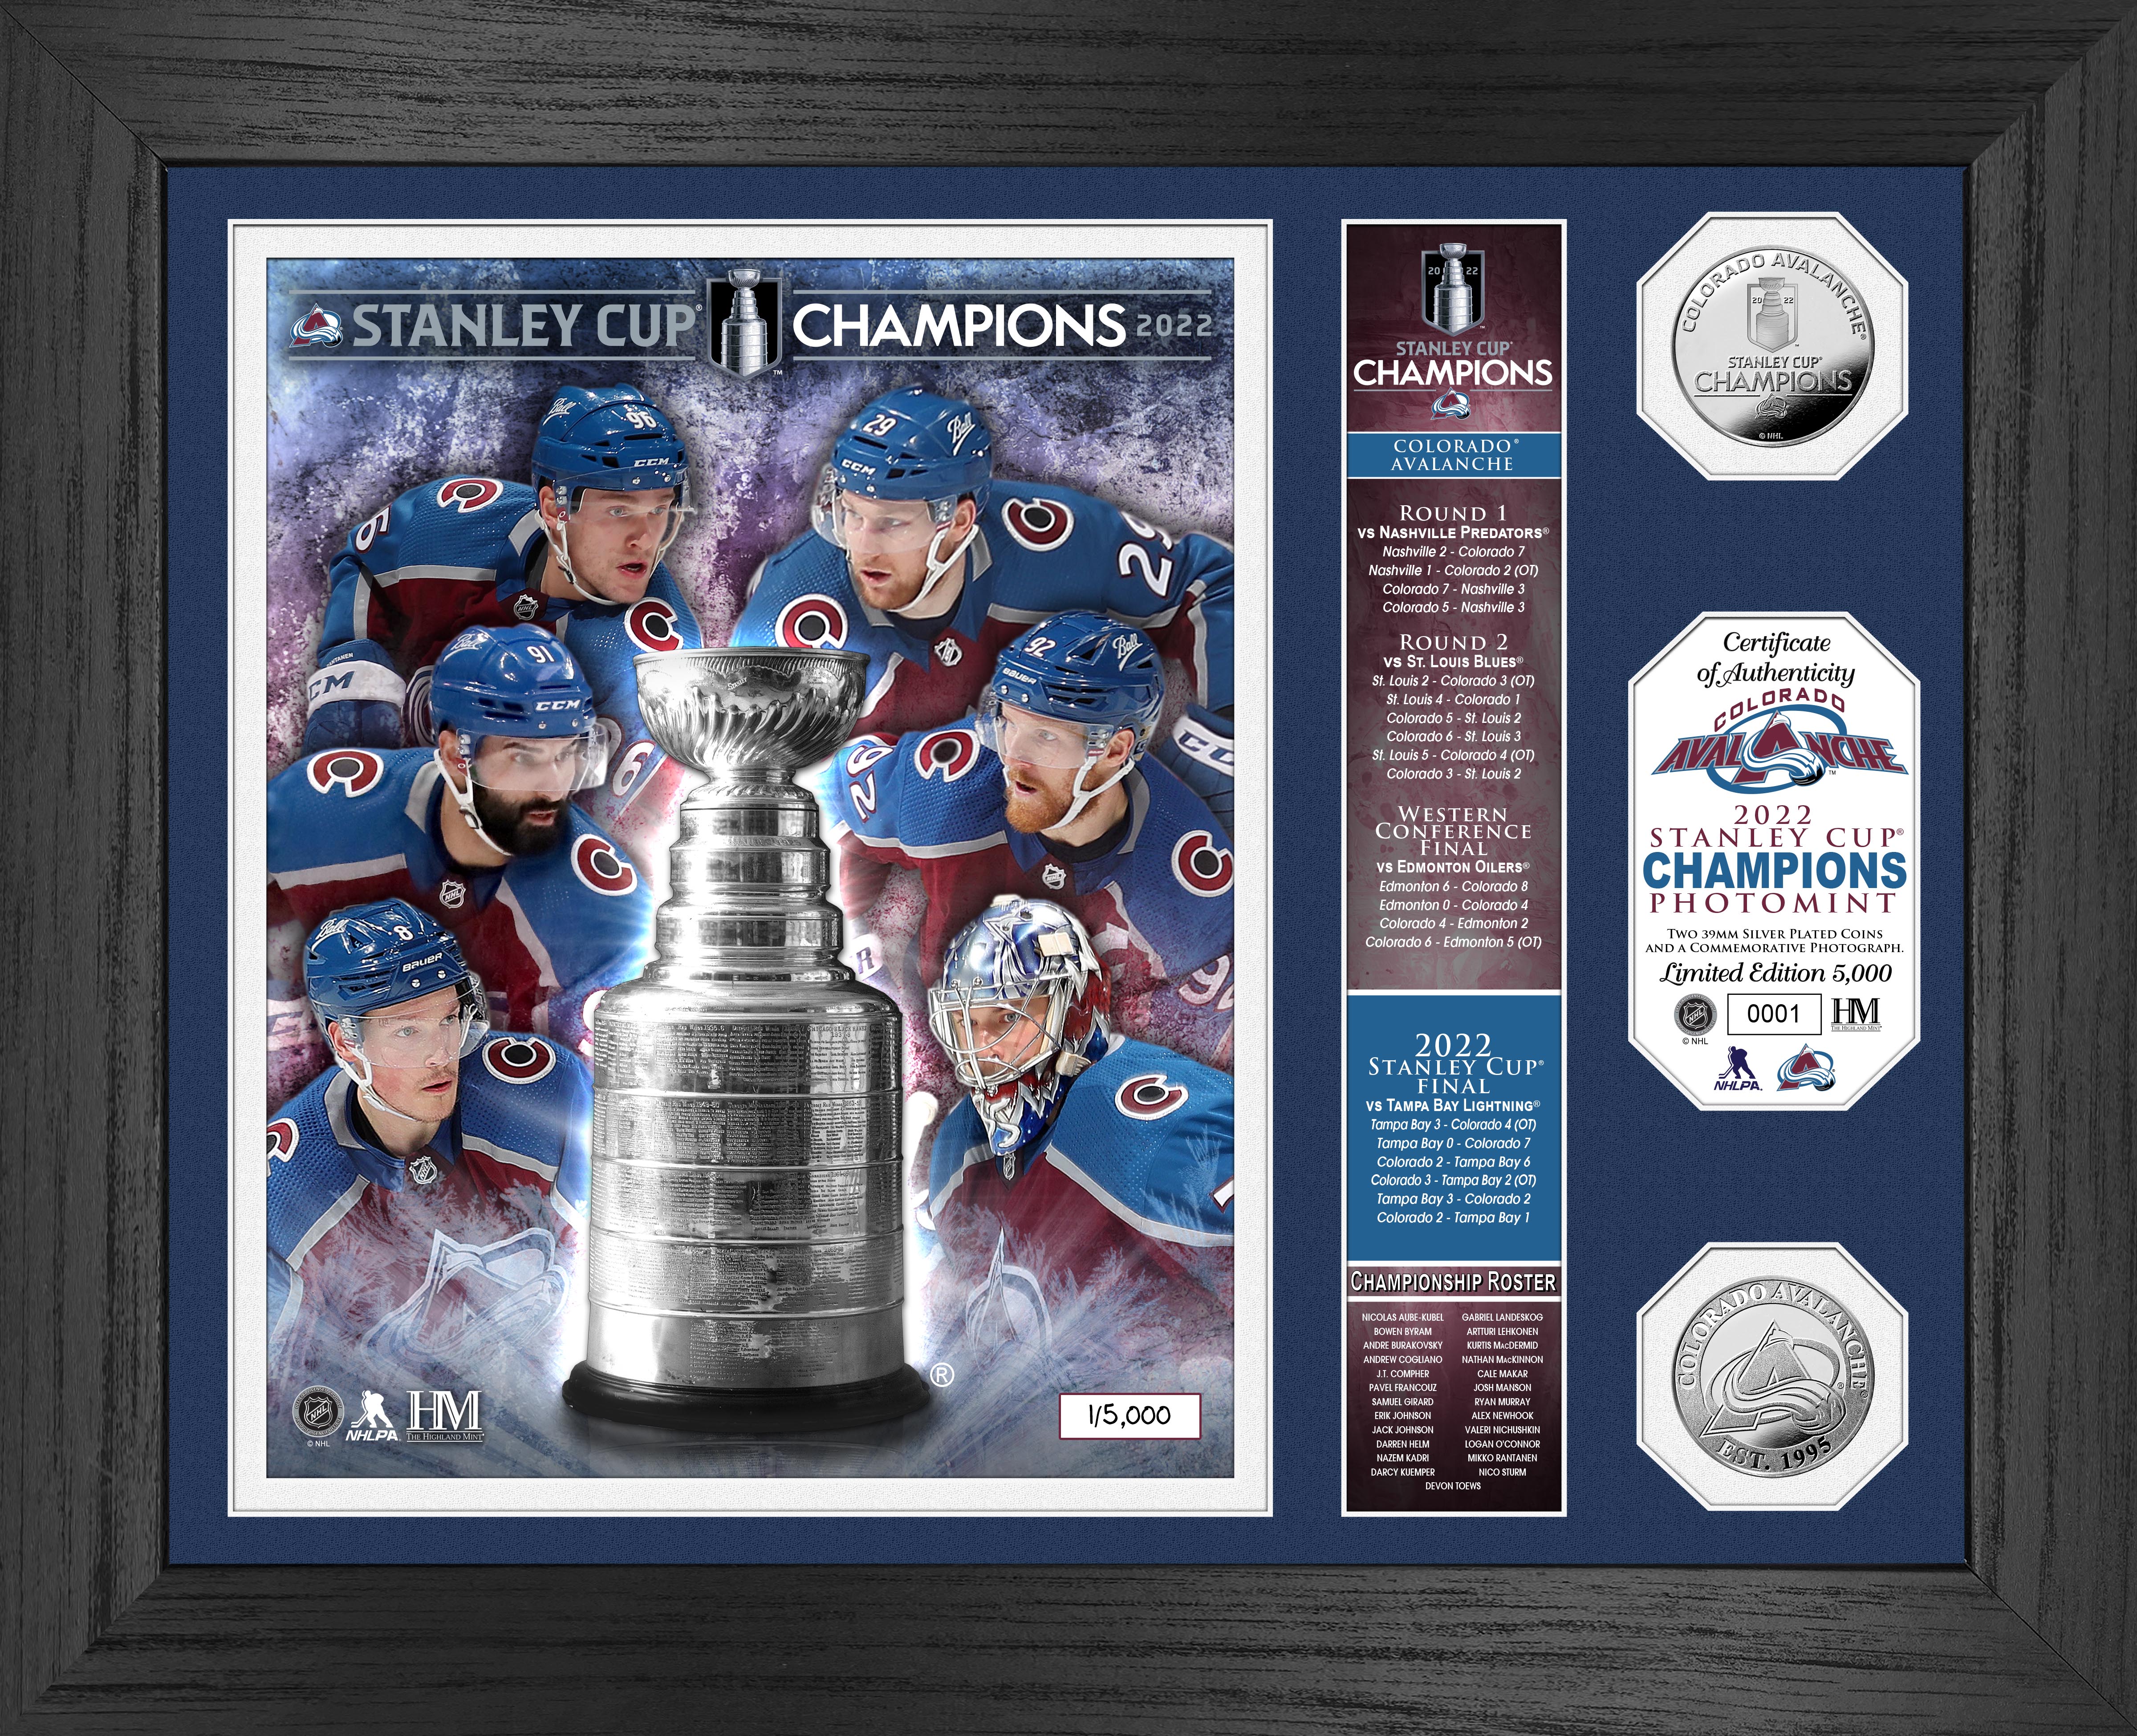 Colorado Avalanche 2022 Stanley Cup Final Champions Banner Silver Coin Photo Mint